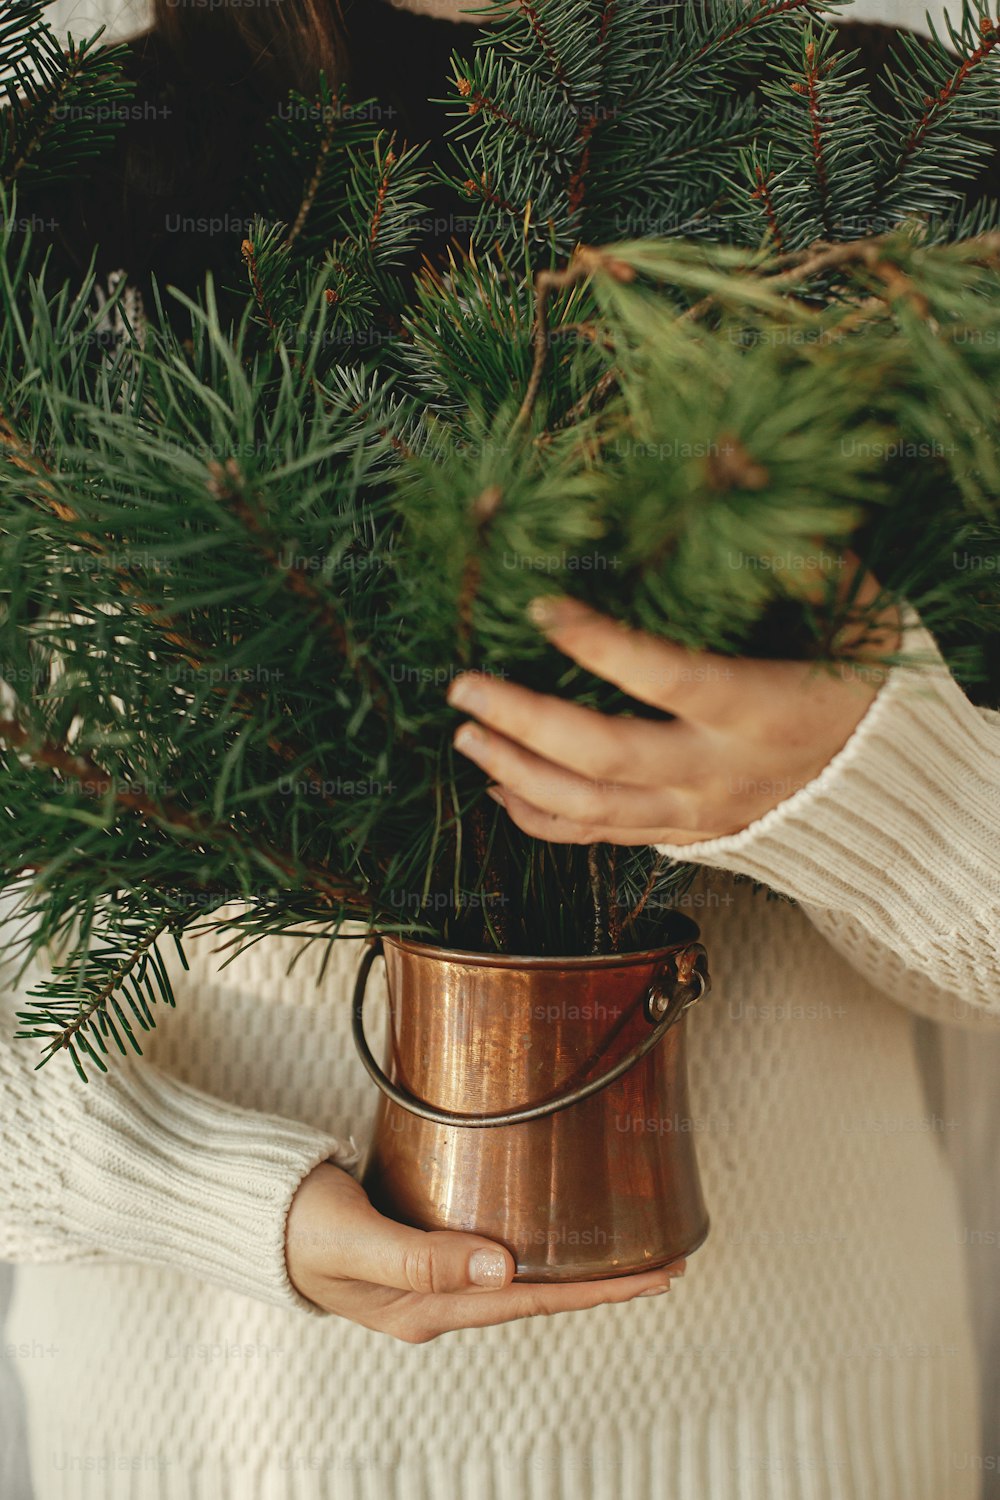 Woman hands in stylish cozy sweater holding vintage vase with pine and fir branches in rustic room, cropped view. Preparations for winter holidays. Merry Christmas!